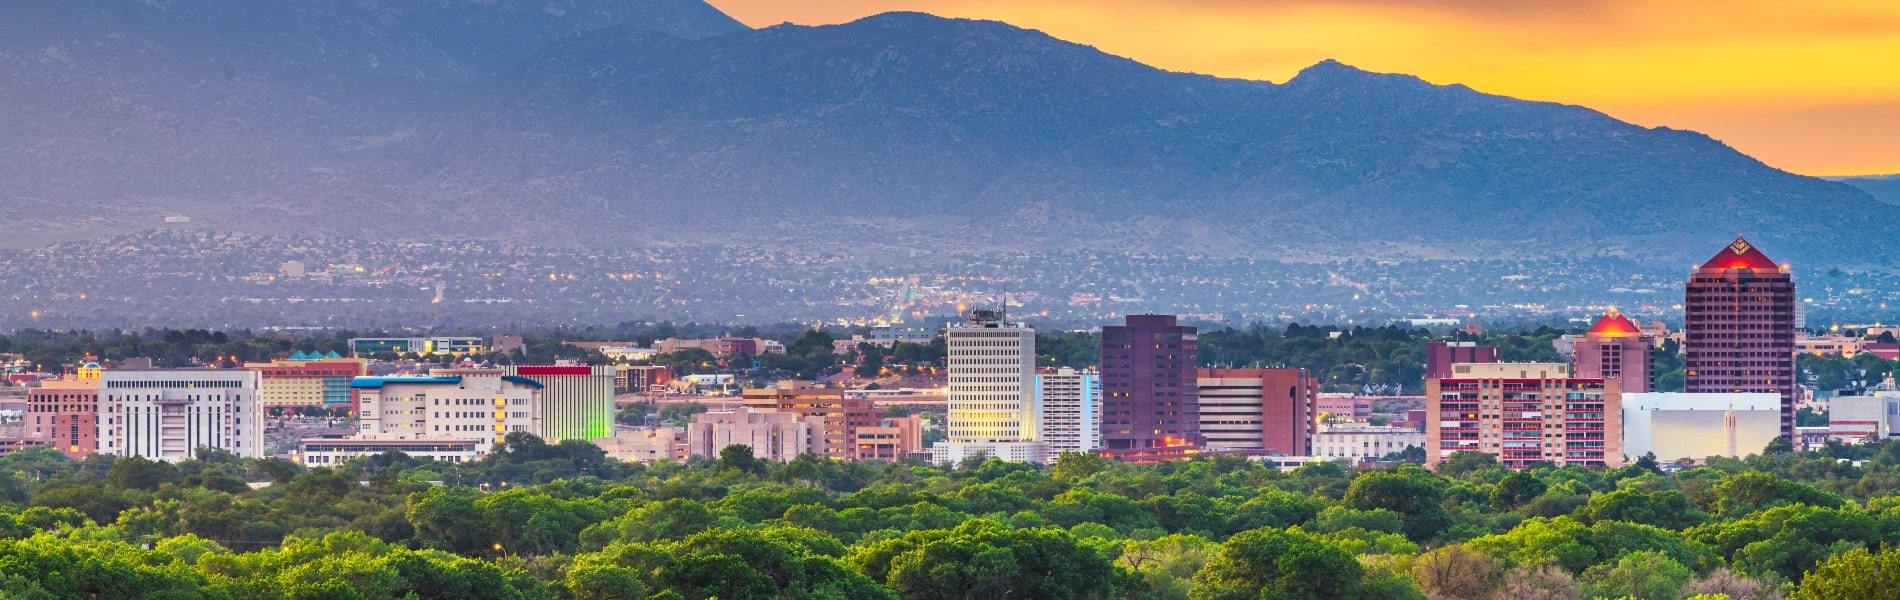 Aerial view of Downtown Albuquerque in New Mexico